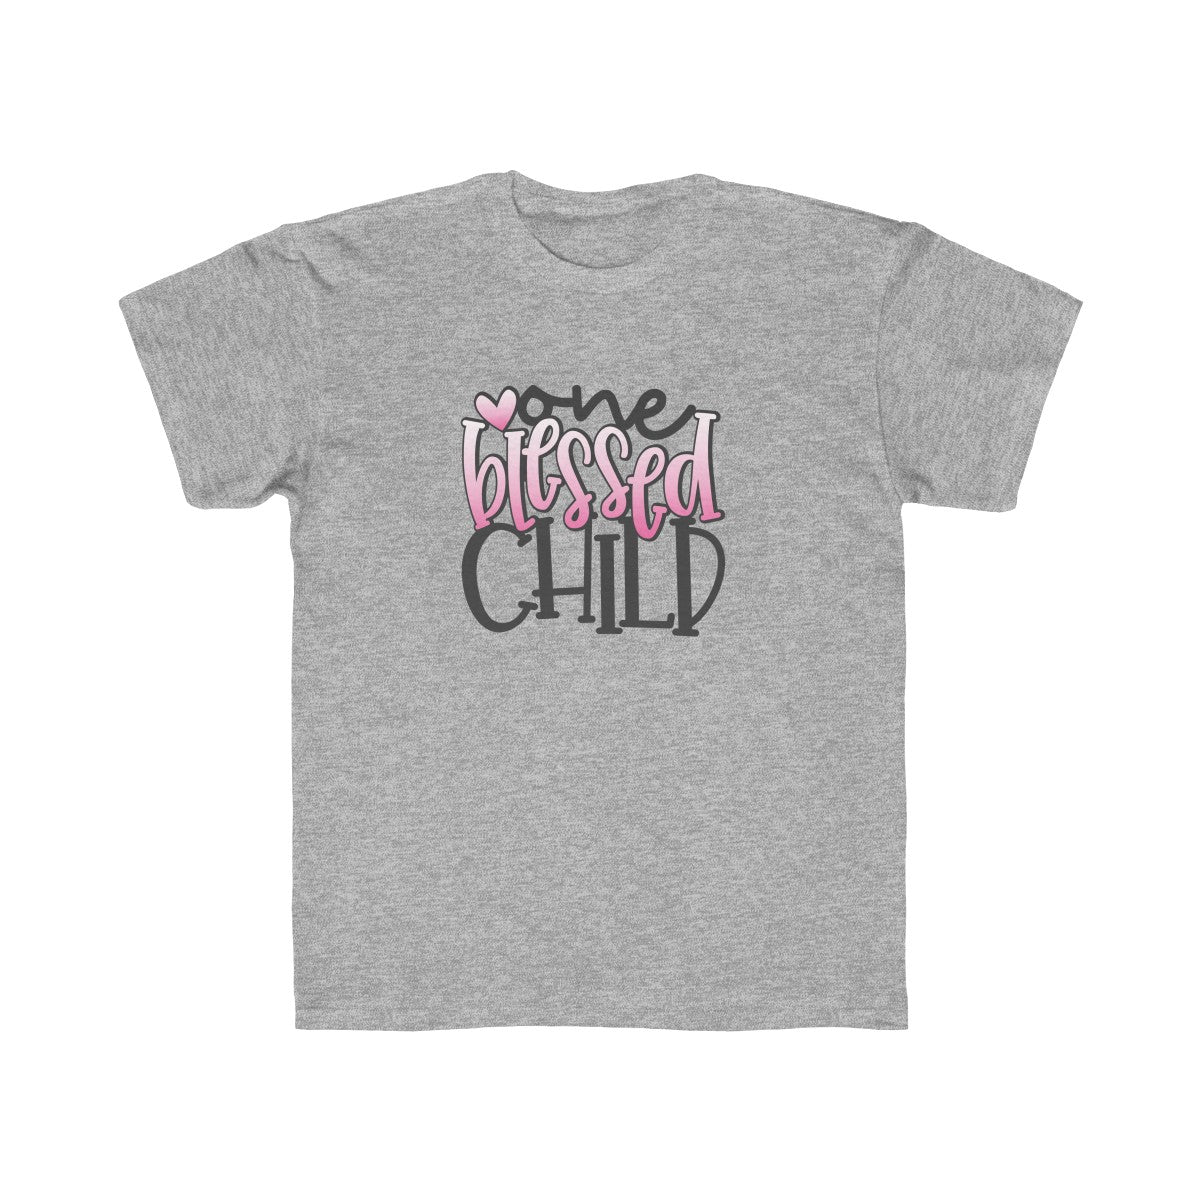 Kids Blessed Child Tee